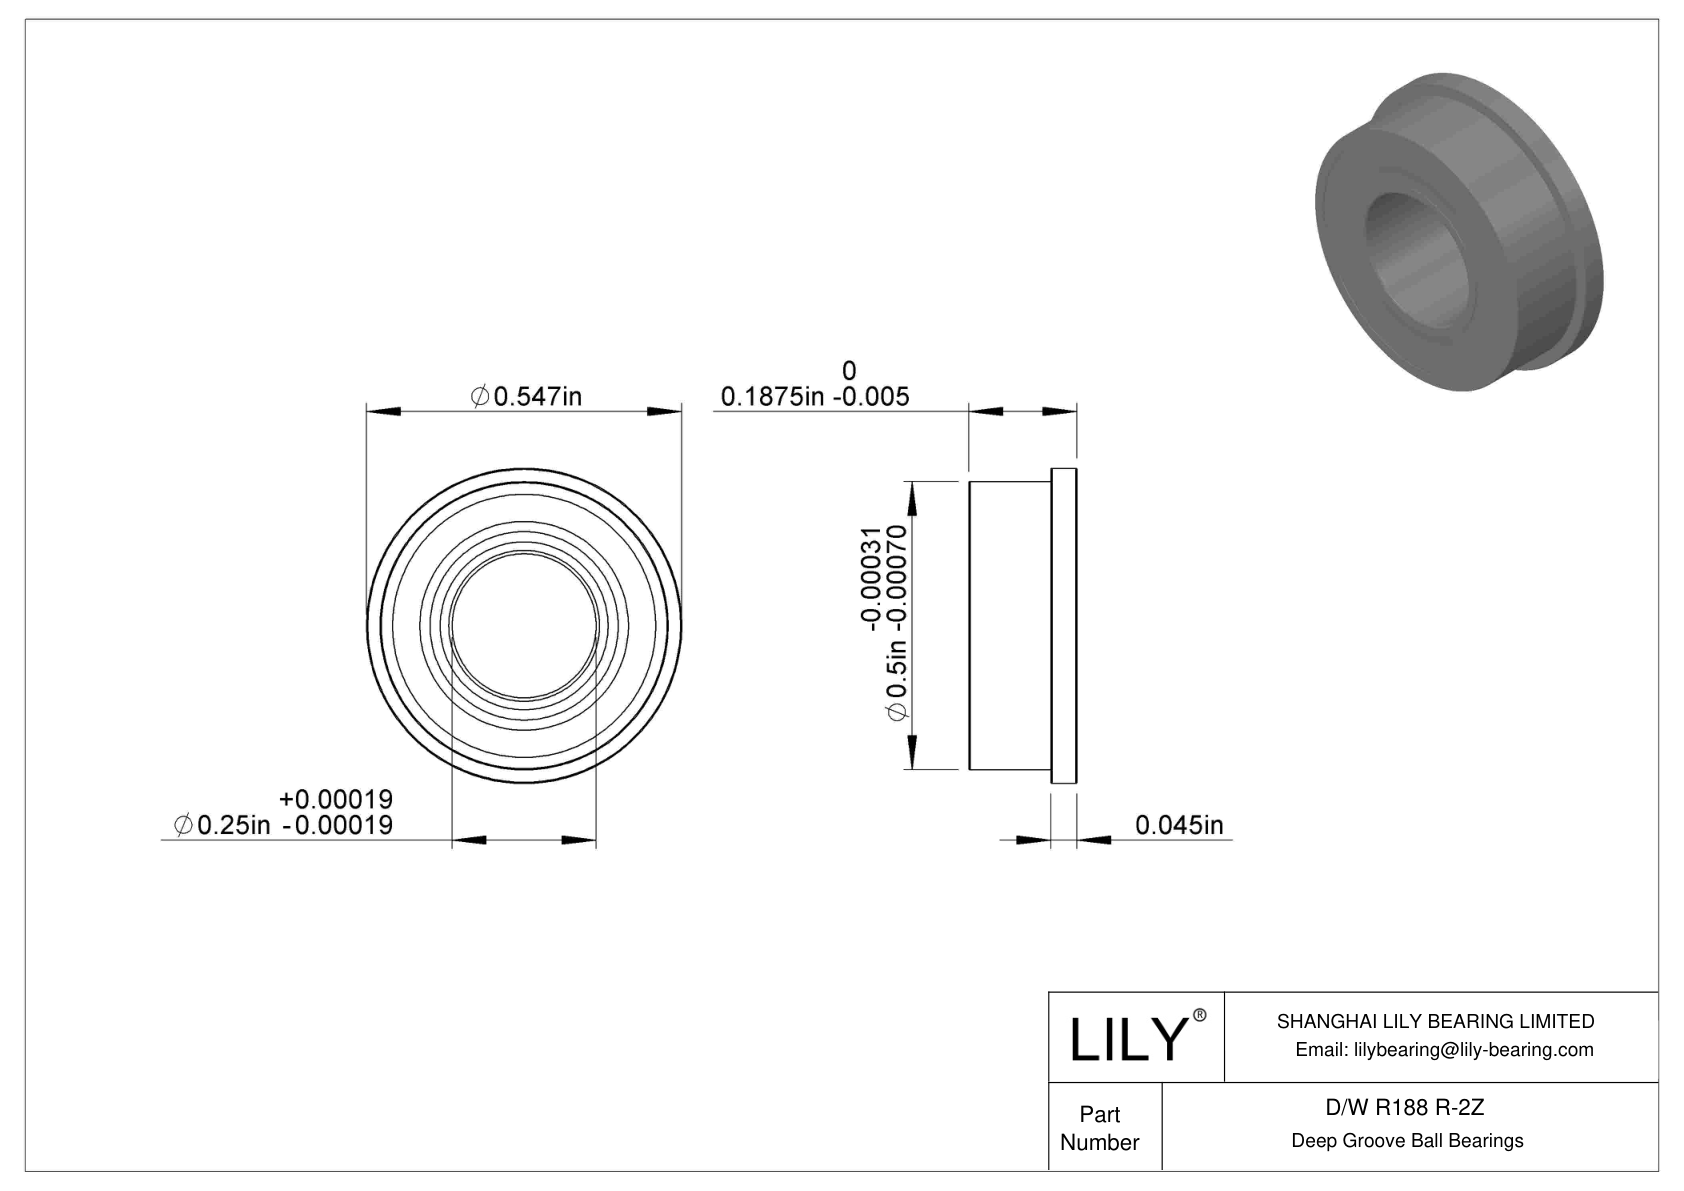 D/W R188 R-2Z Flanged Ball Bearings cad drawing